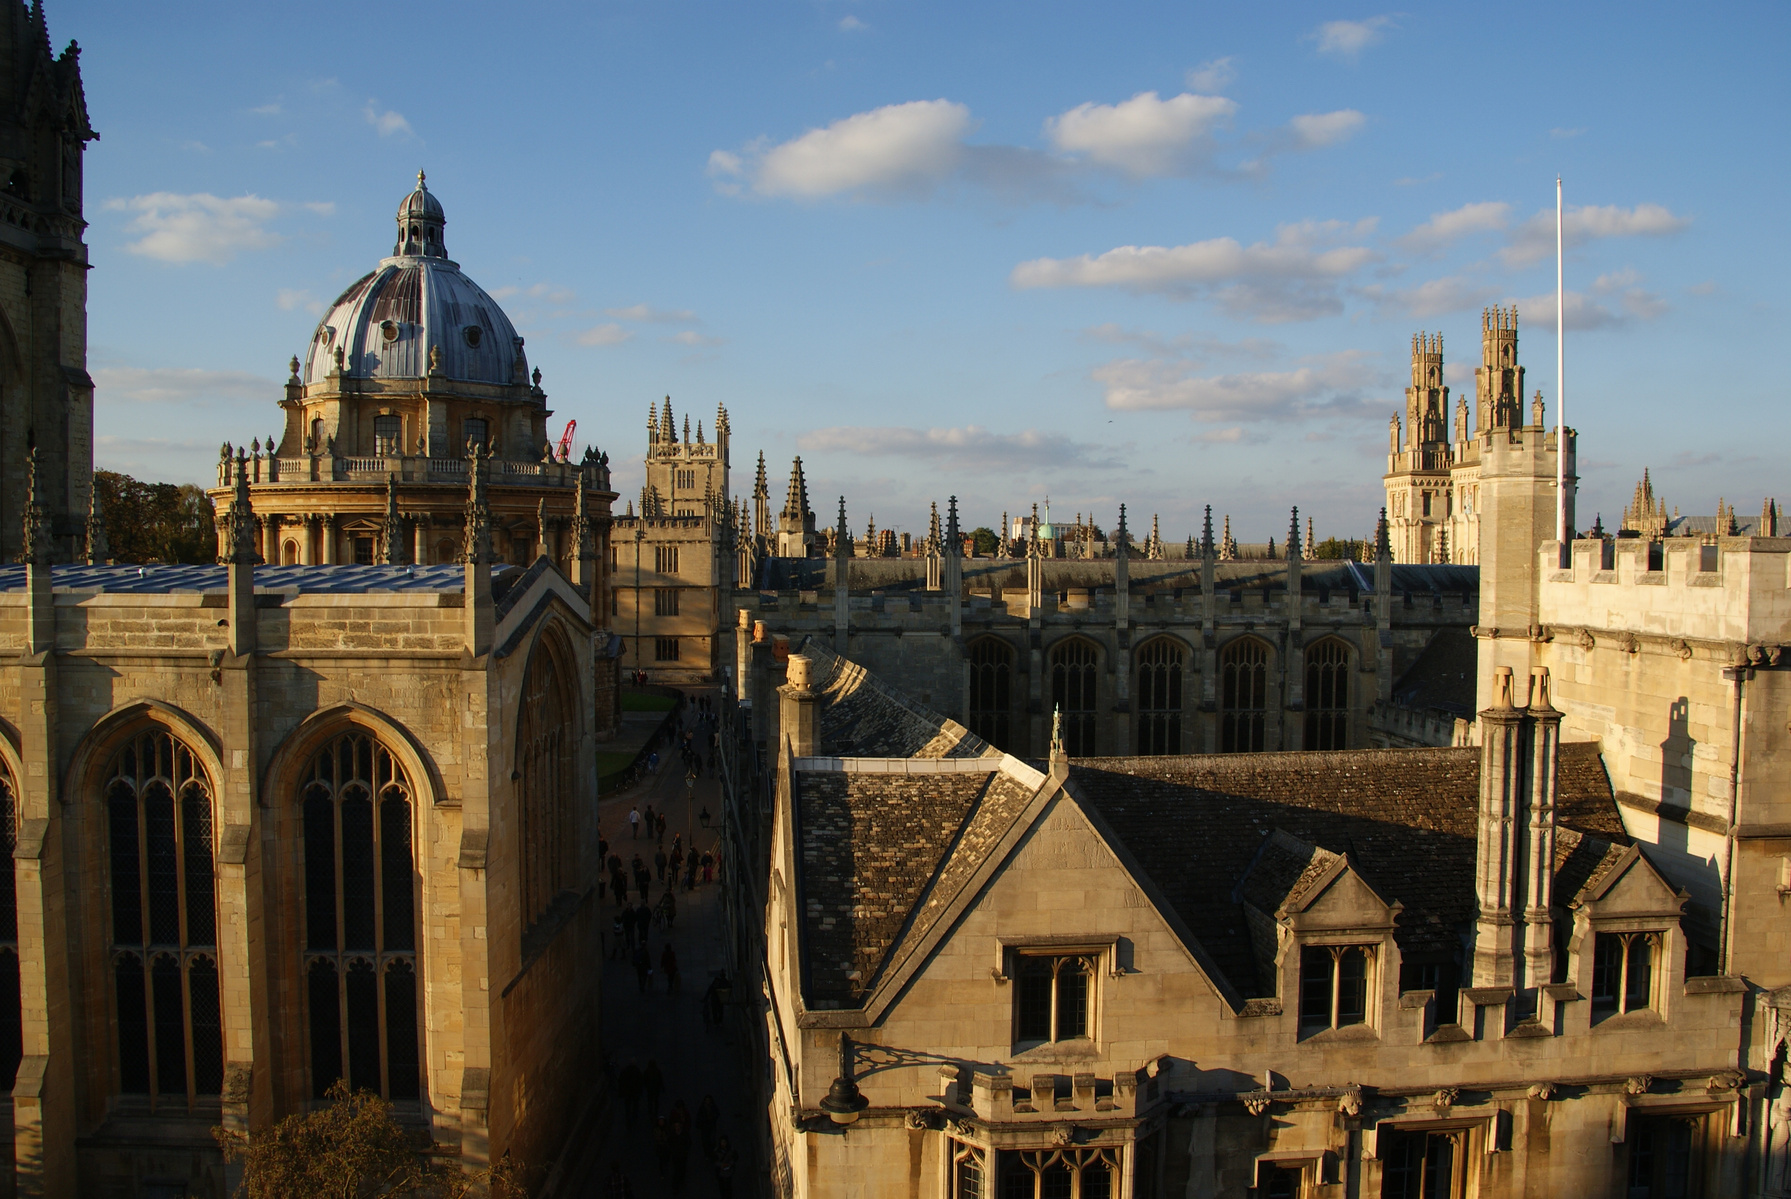 A view over the rooftops of the city of Oxford on a sunny day, with the dome of the Radcliffe Camera in the background.